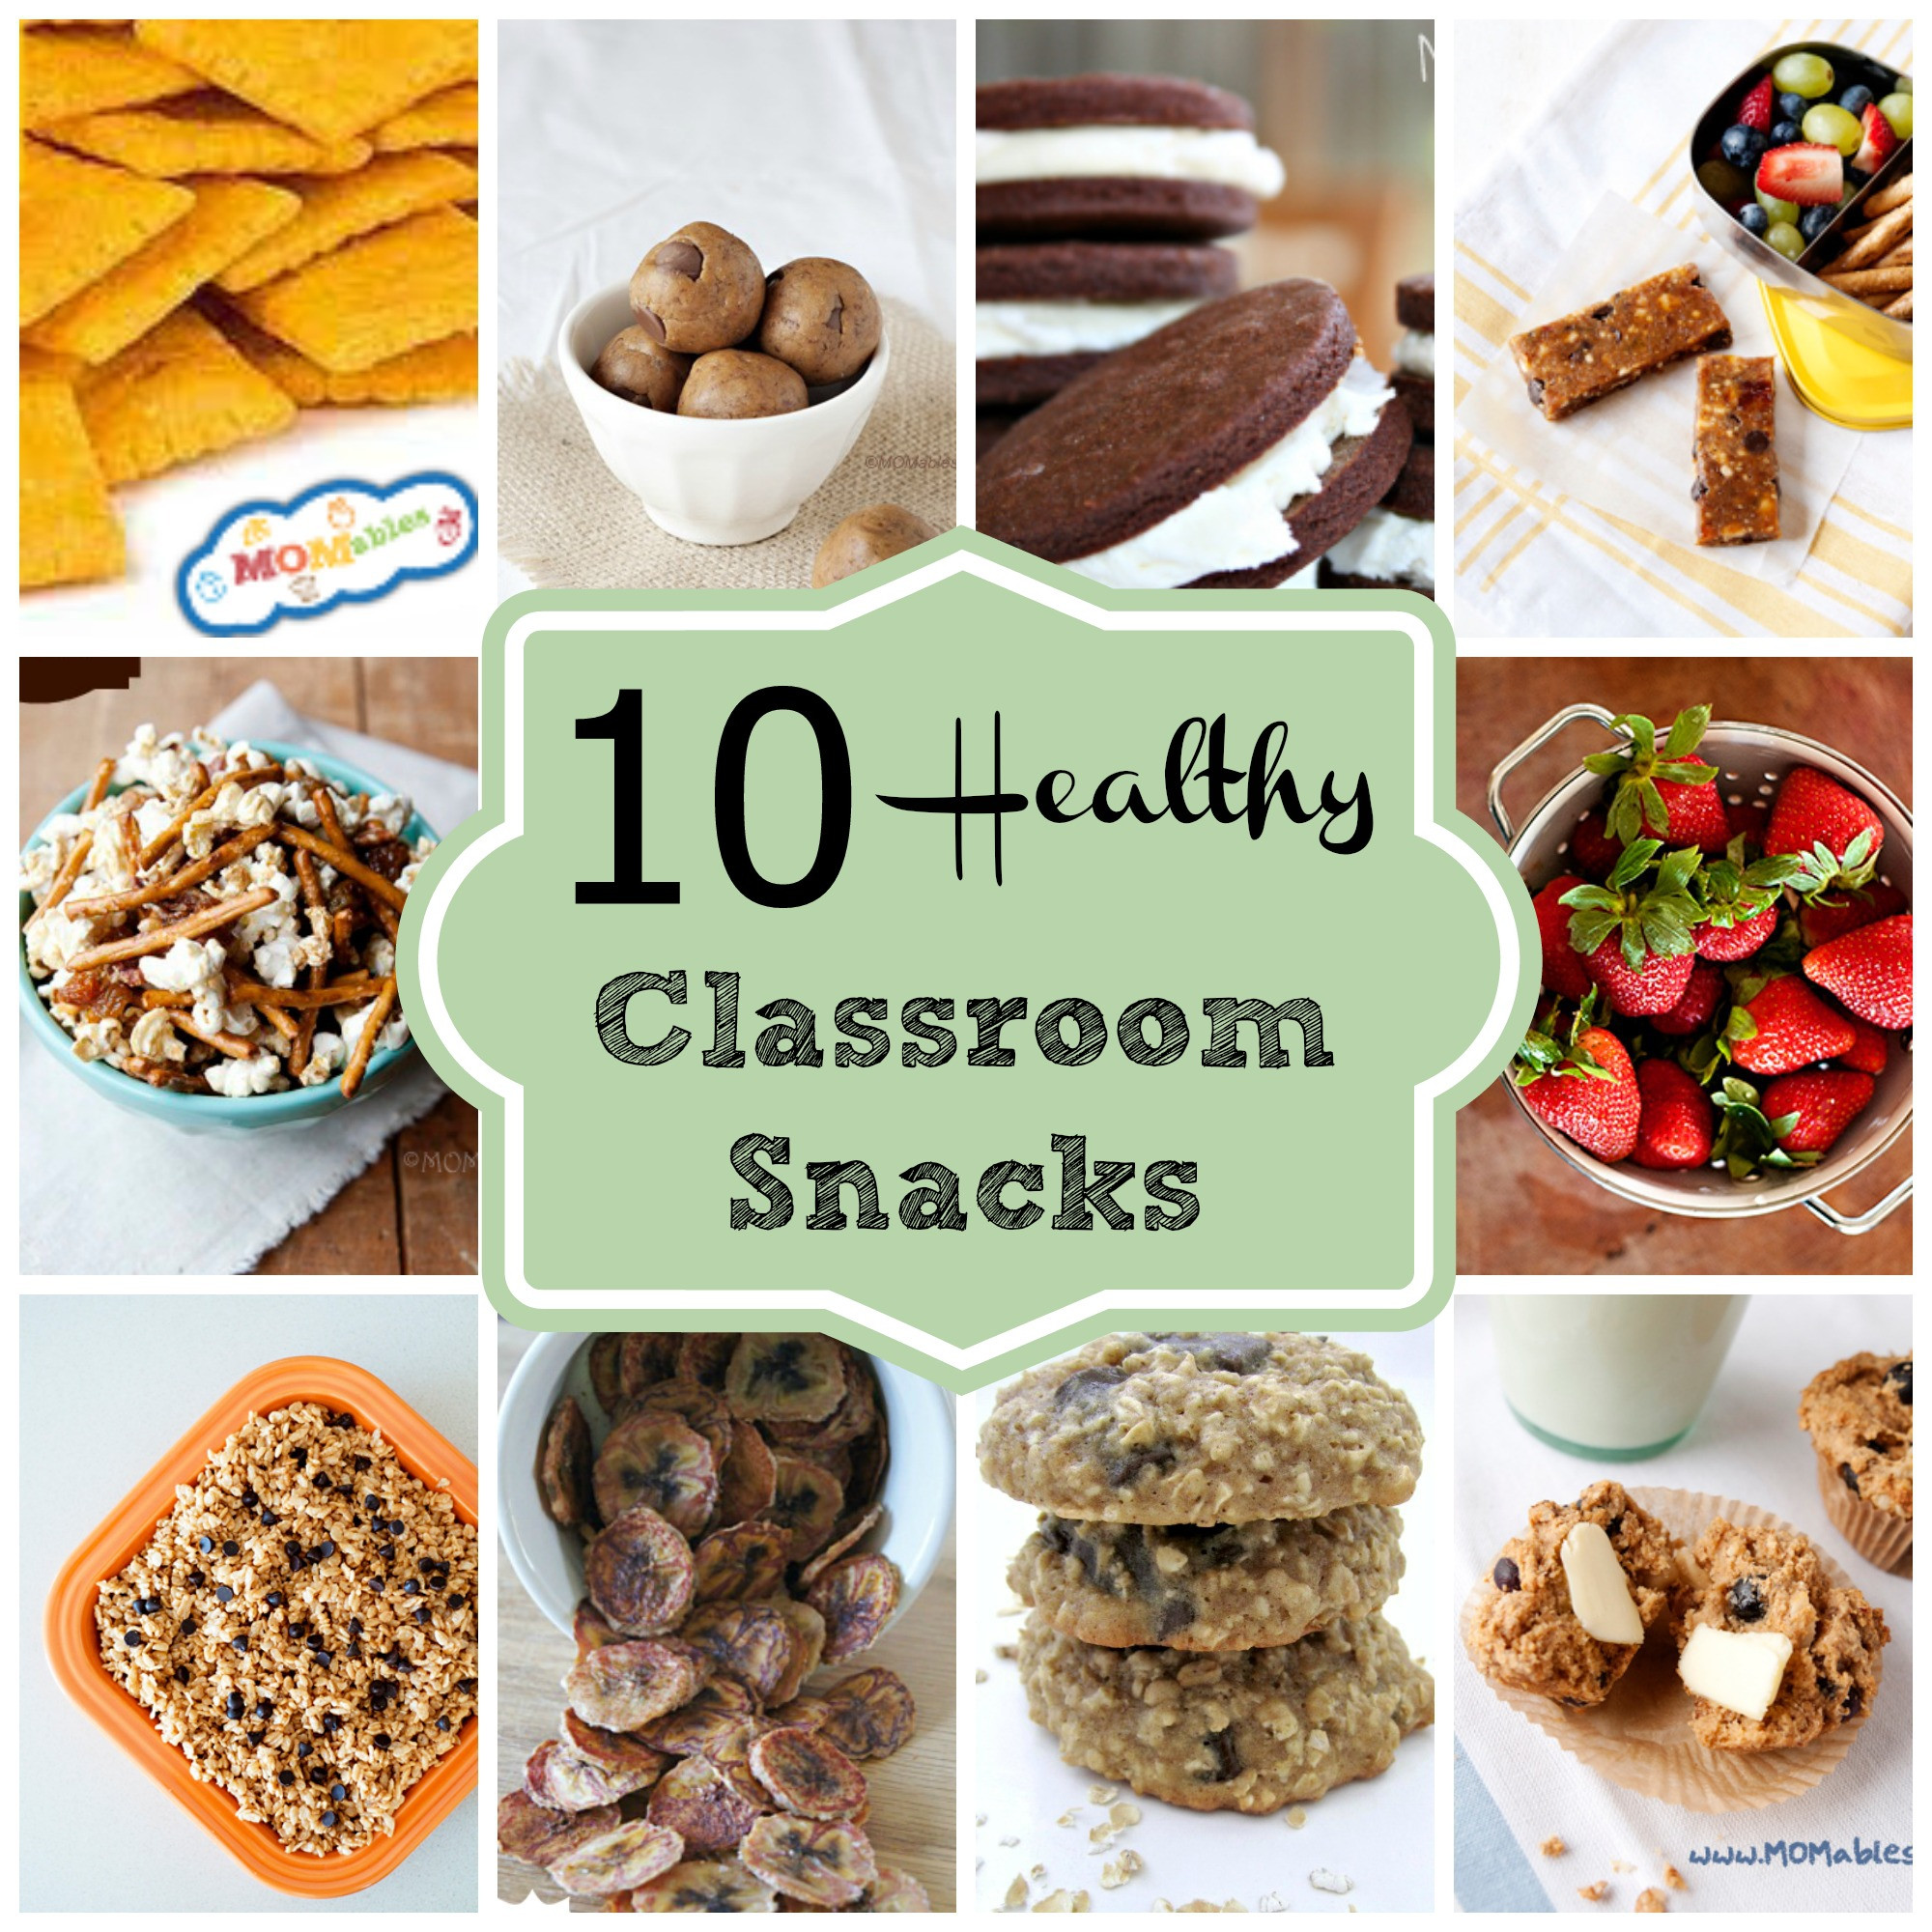 Healthy Snacks For Kids To Take To School
 10 Healthy Classroom Snacks